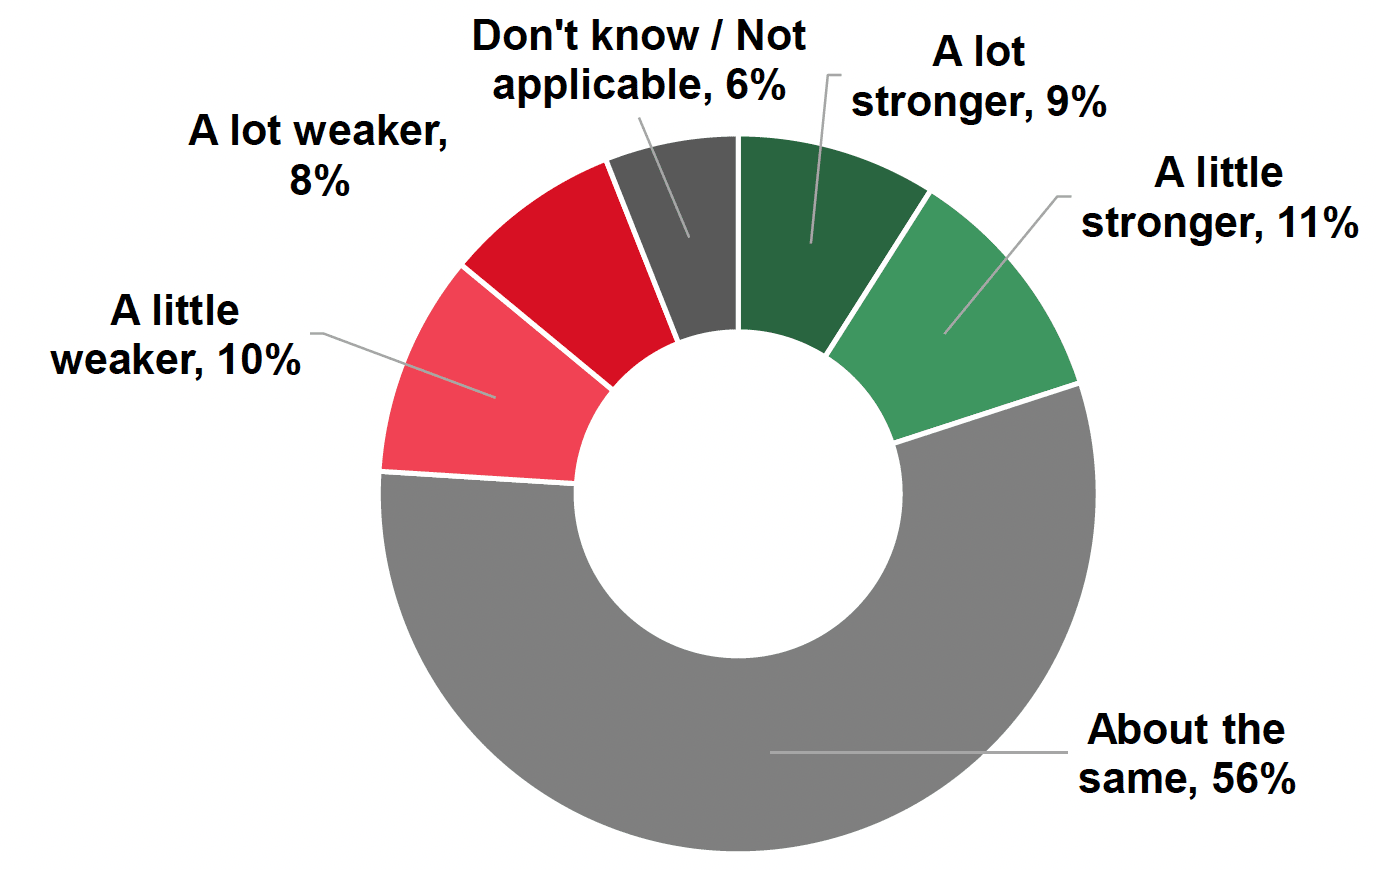 Pie chart showing that 20% say their relationships with colleagues are stronger, 18% weaker and 56% about the same